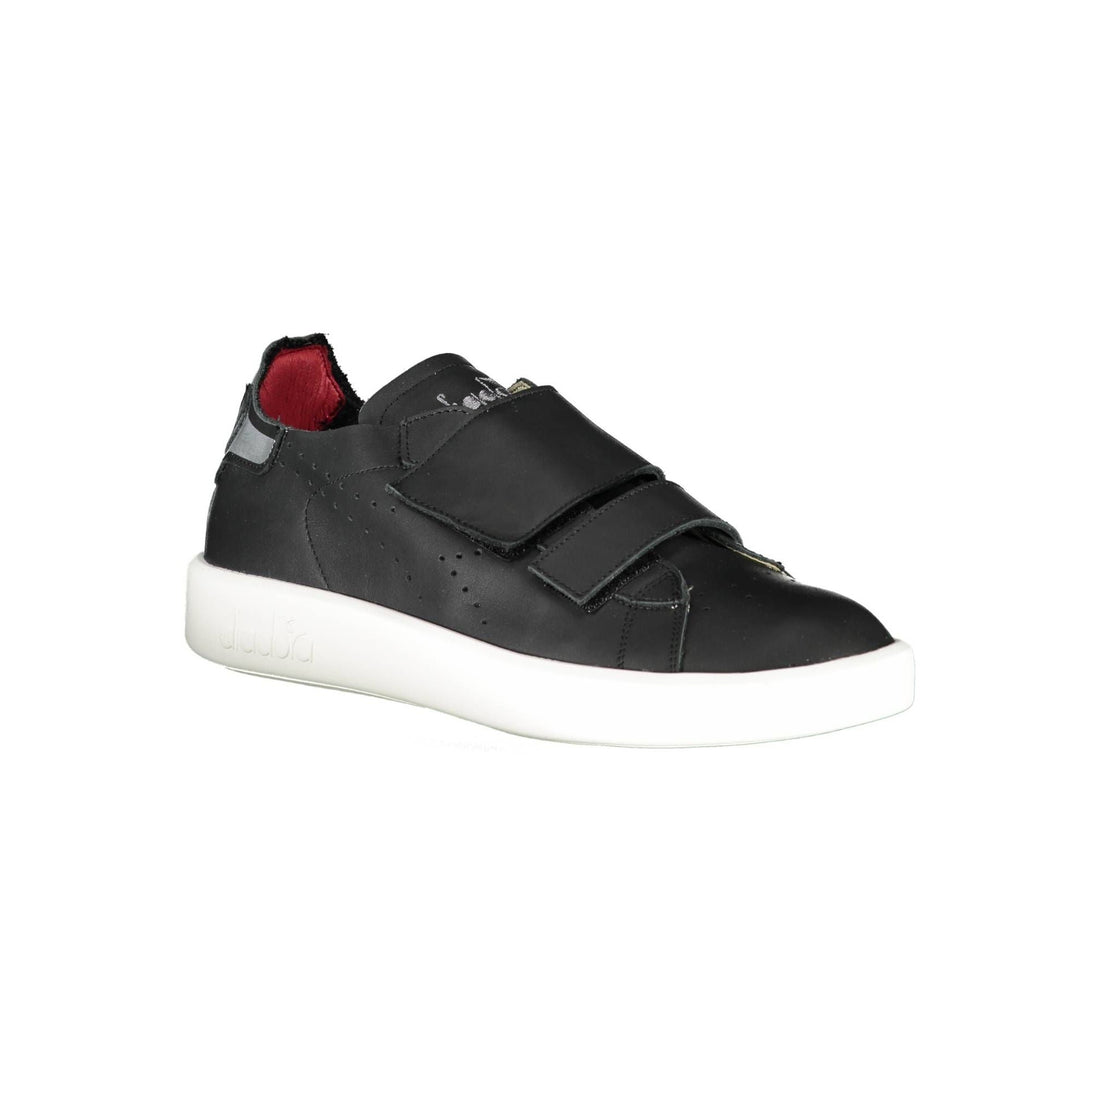 Diadora Sleek Black Leather Sneakers with Contrast Details